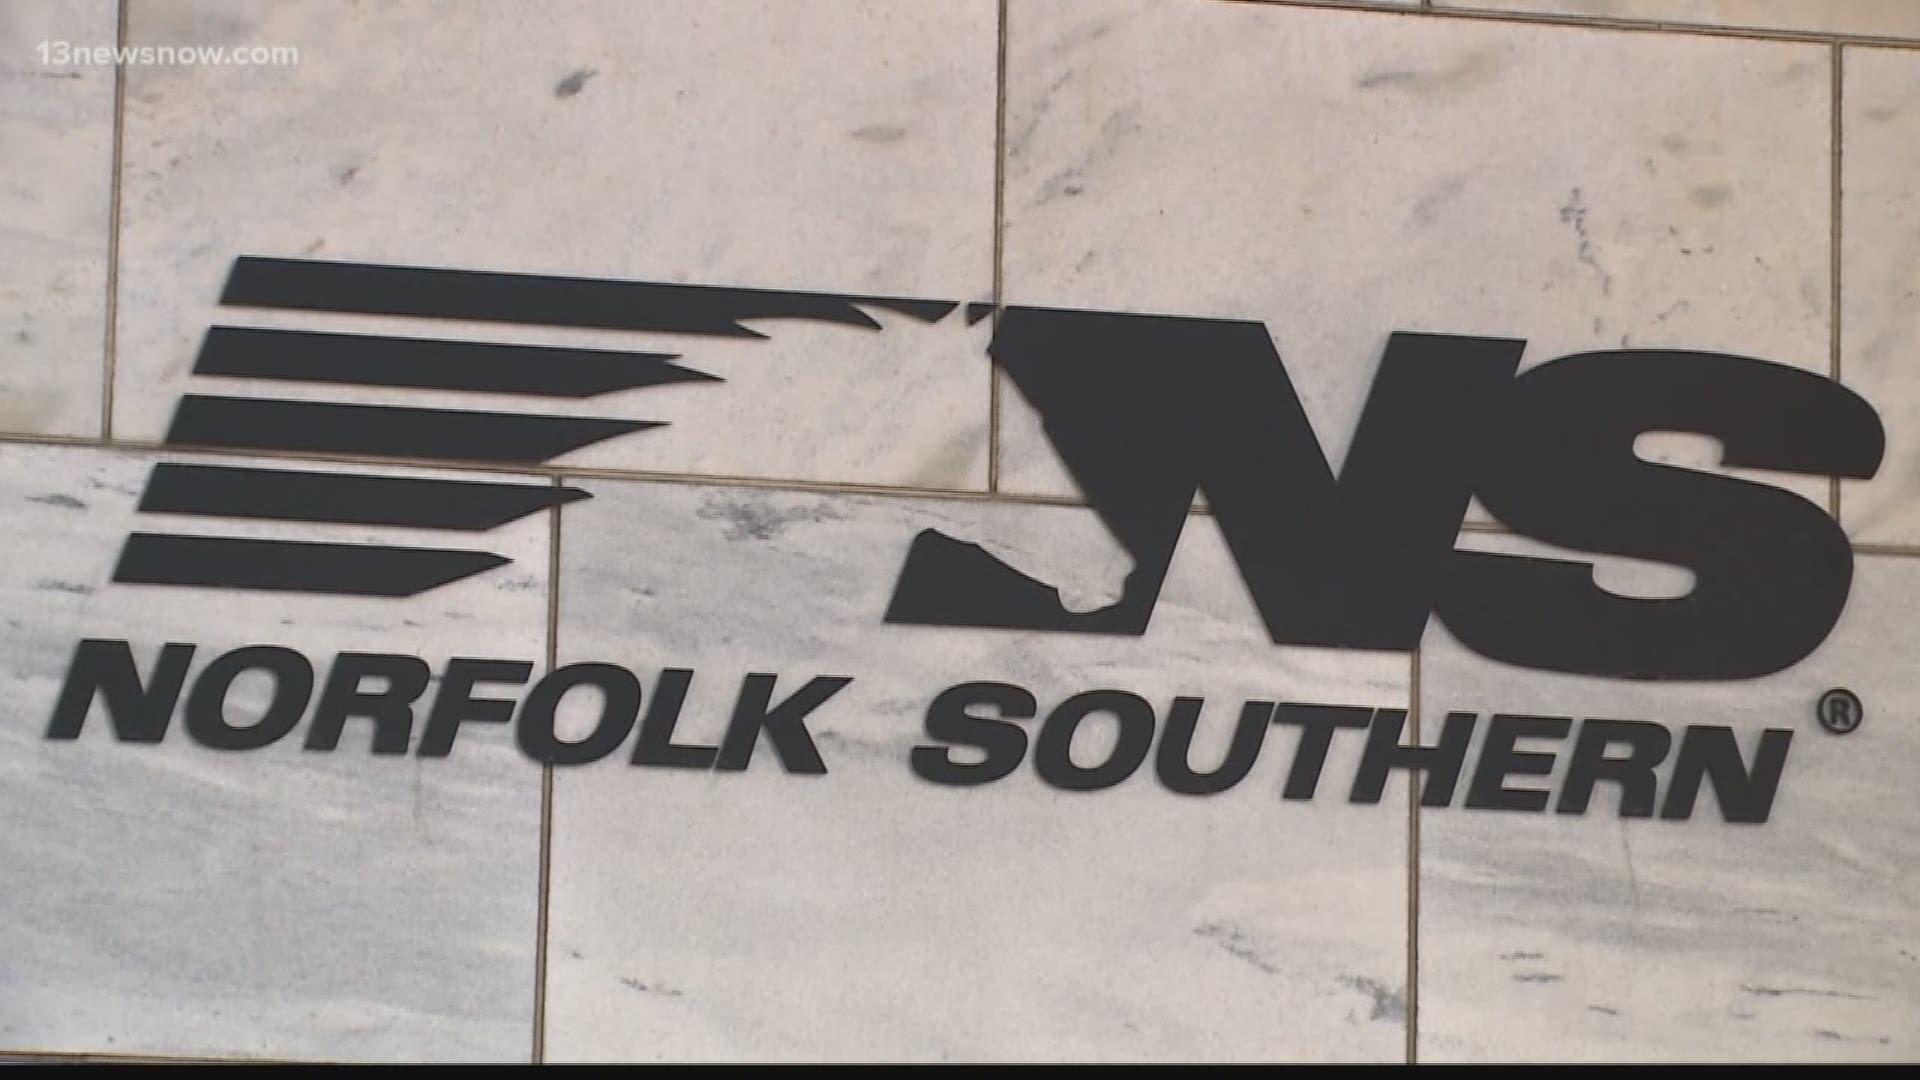 A 16th-floor window on Norfolk Southern's skyscraper broke and the glass fell to the sidewalk below. There was no damage to the interior of the building.